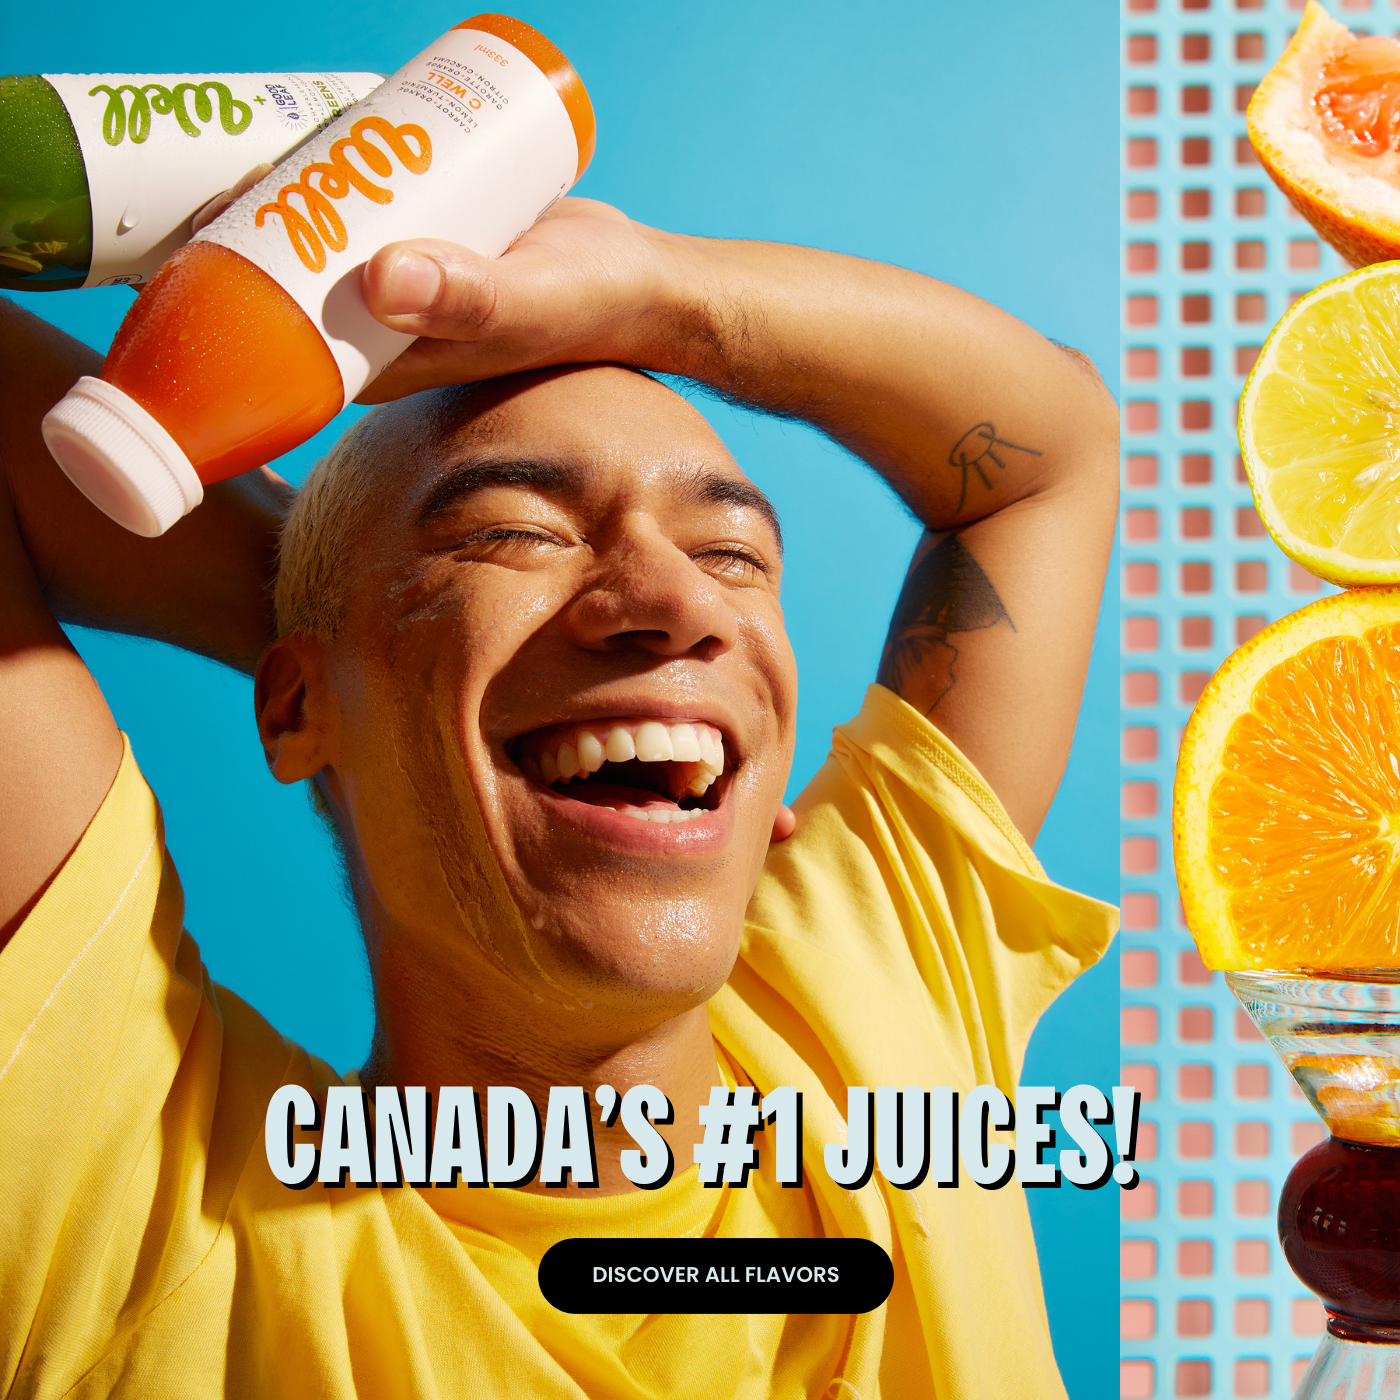 Well Juicery Canada 